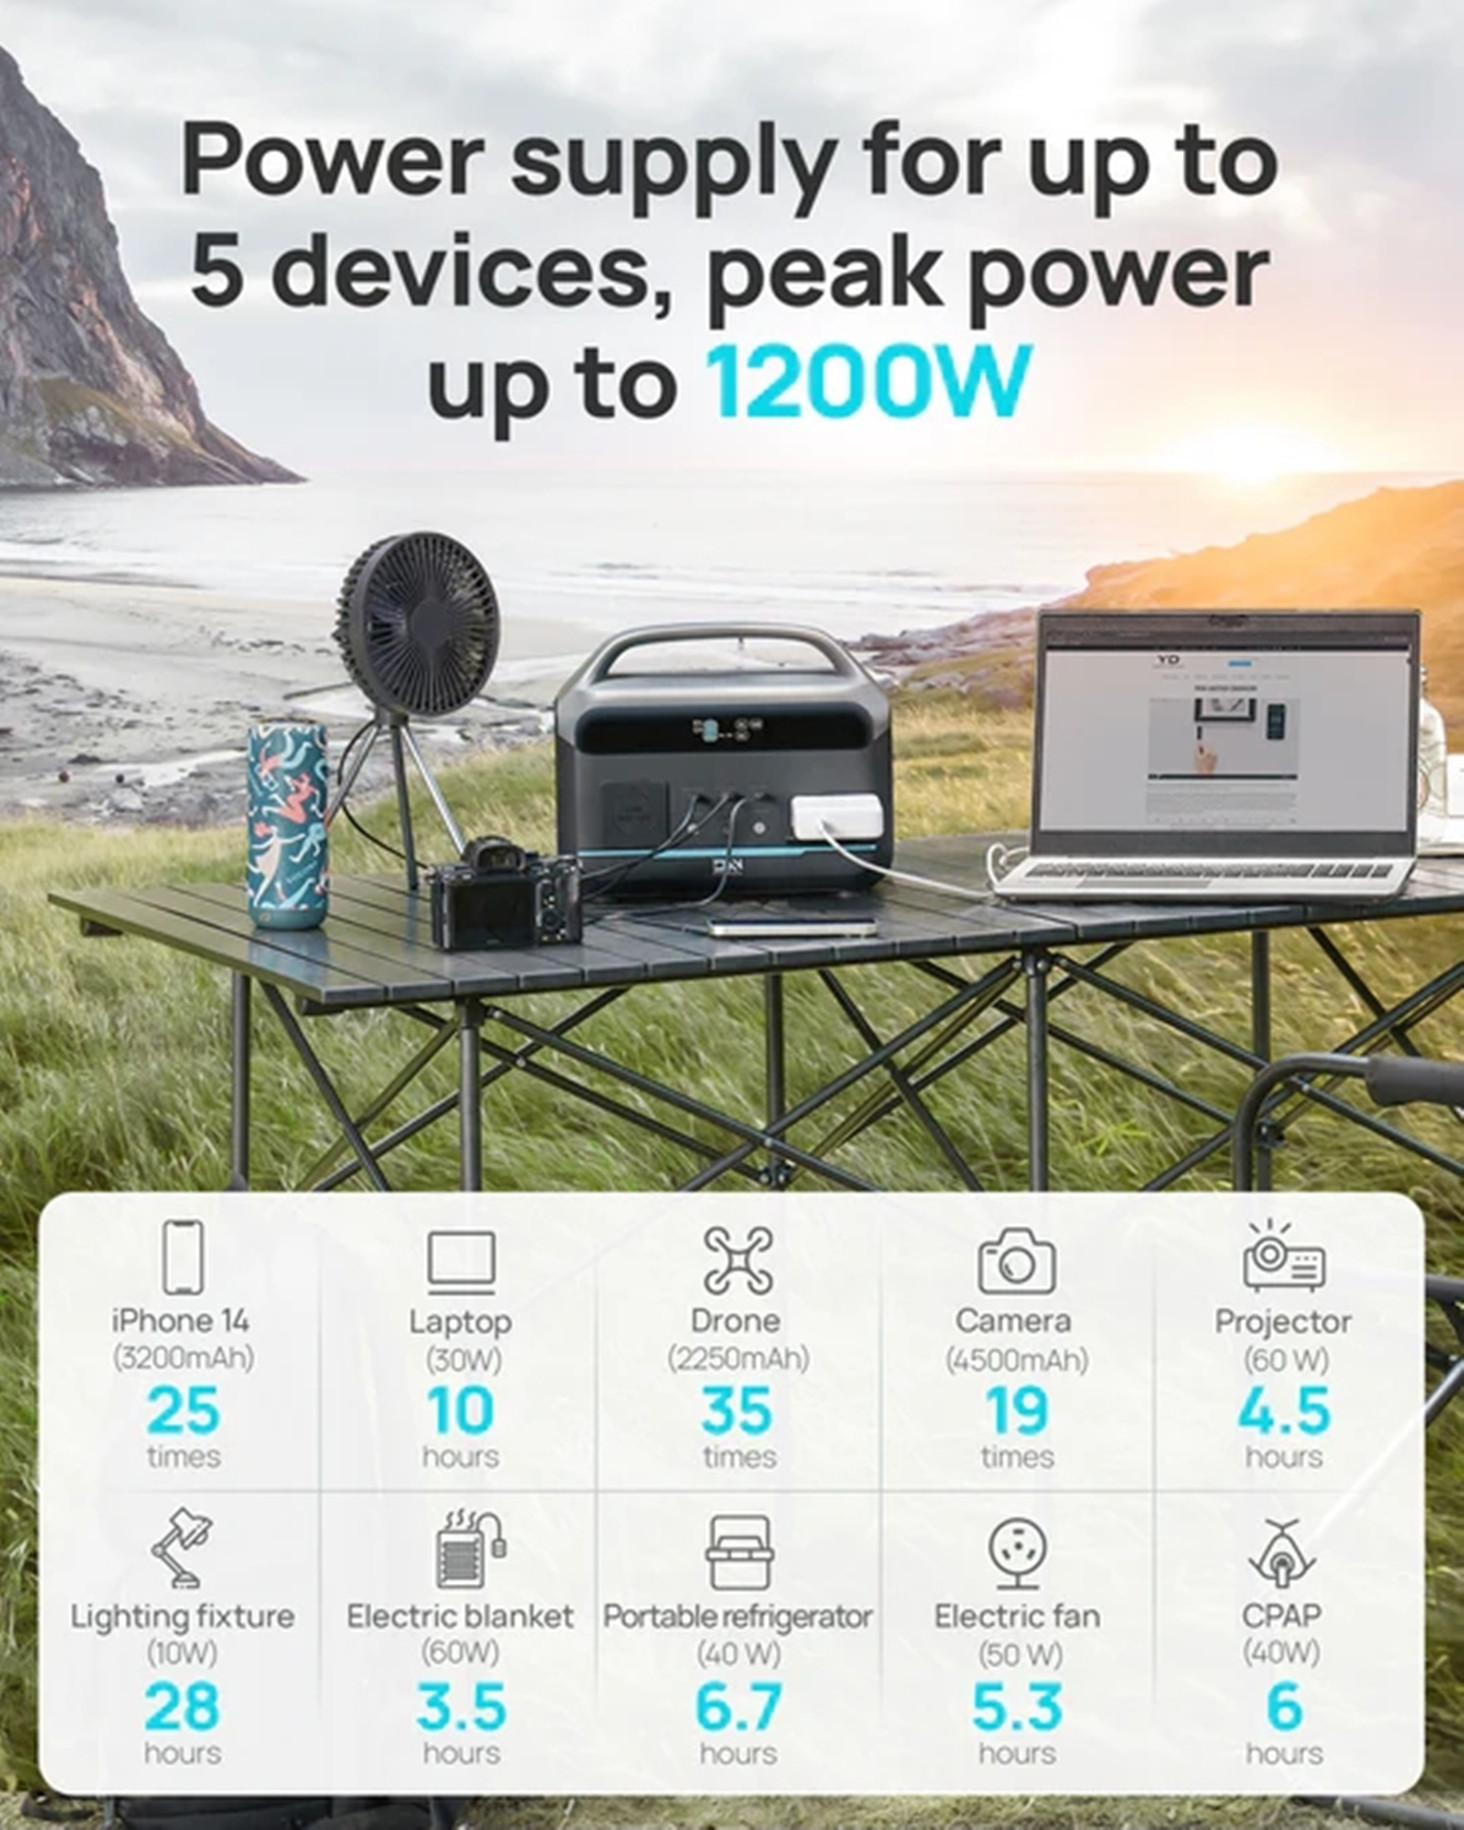 [USA Direct] DaranEner NEO300 PRO Portable Power Station 600W 299Wh LiFePO4 Solar Generator with USB-C PD60W 110V Pure Sine Wave AC Outlet 600W Peak Outdoor Quiet Generators for CPAP Home Use Camping Outage